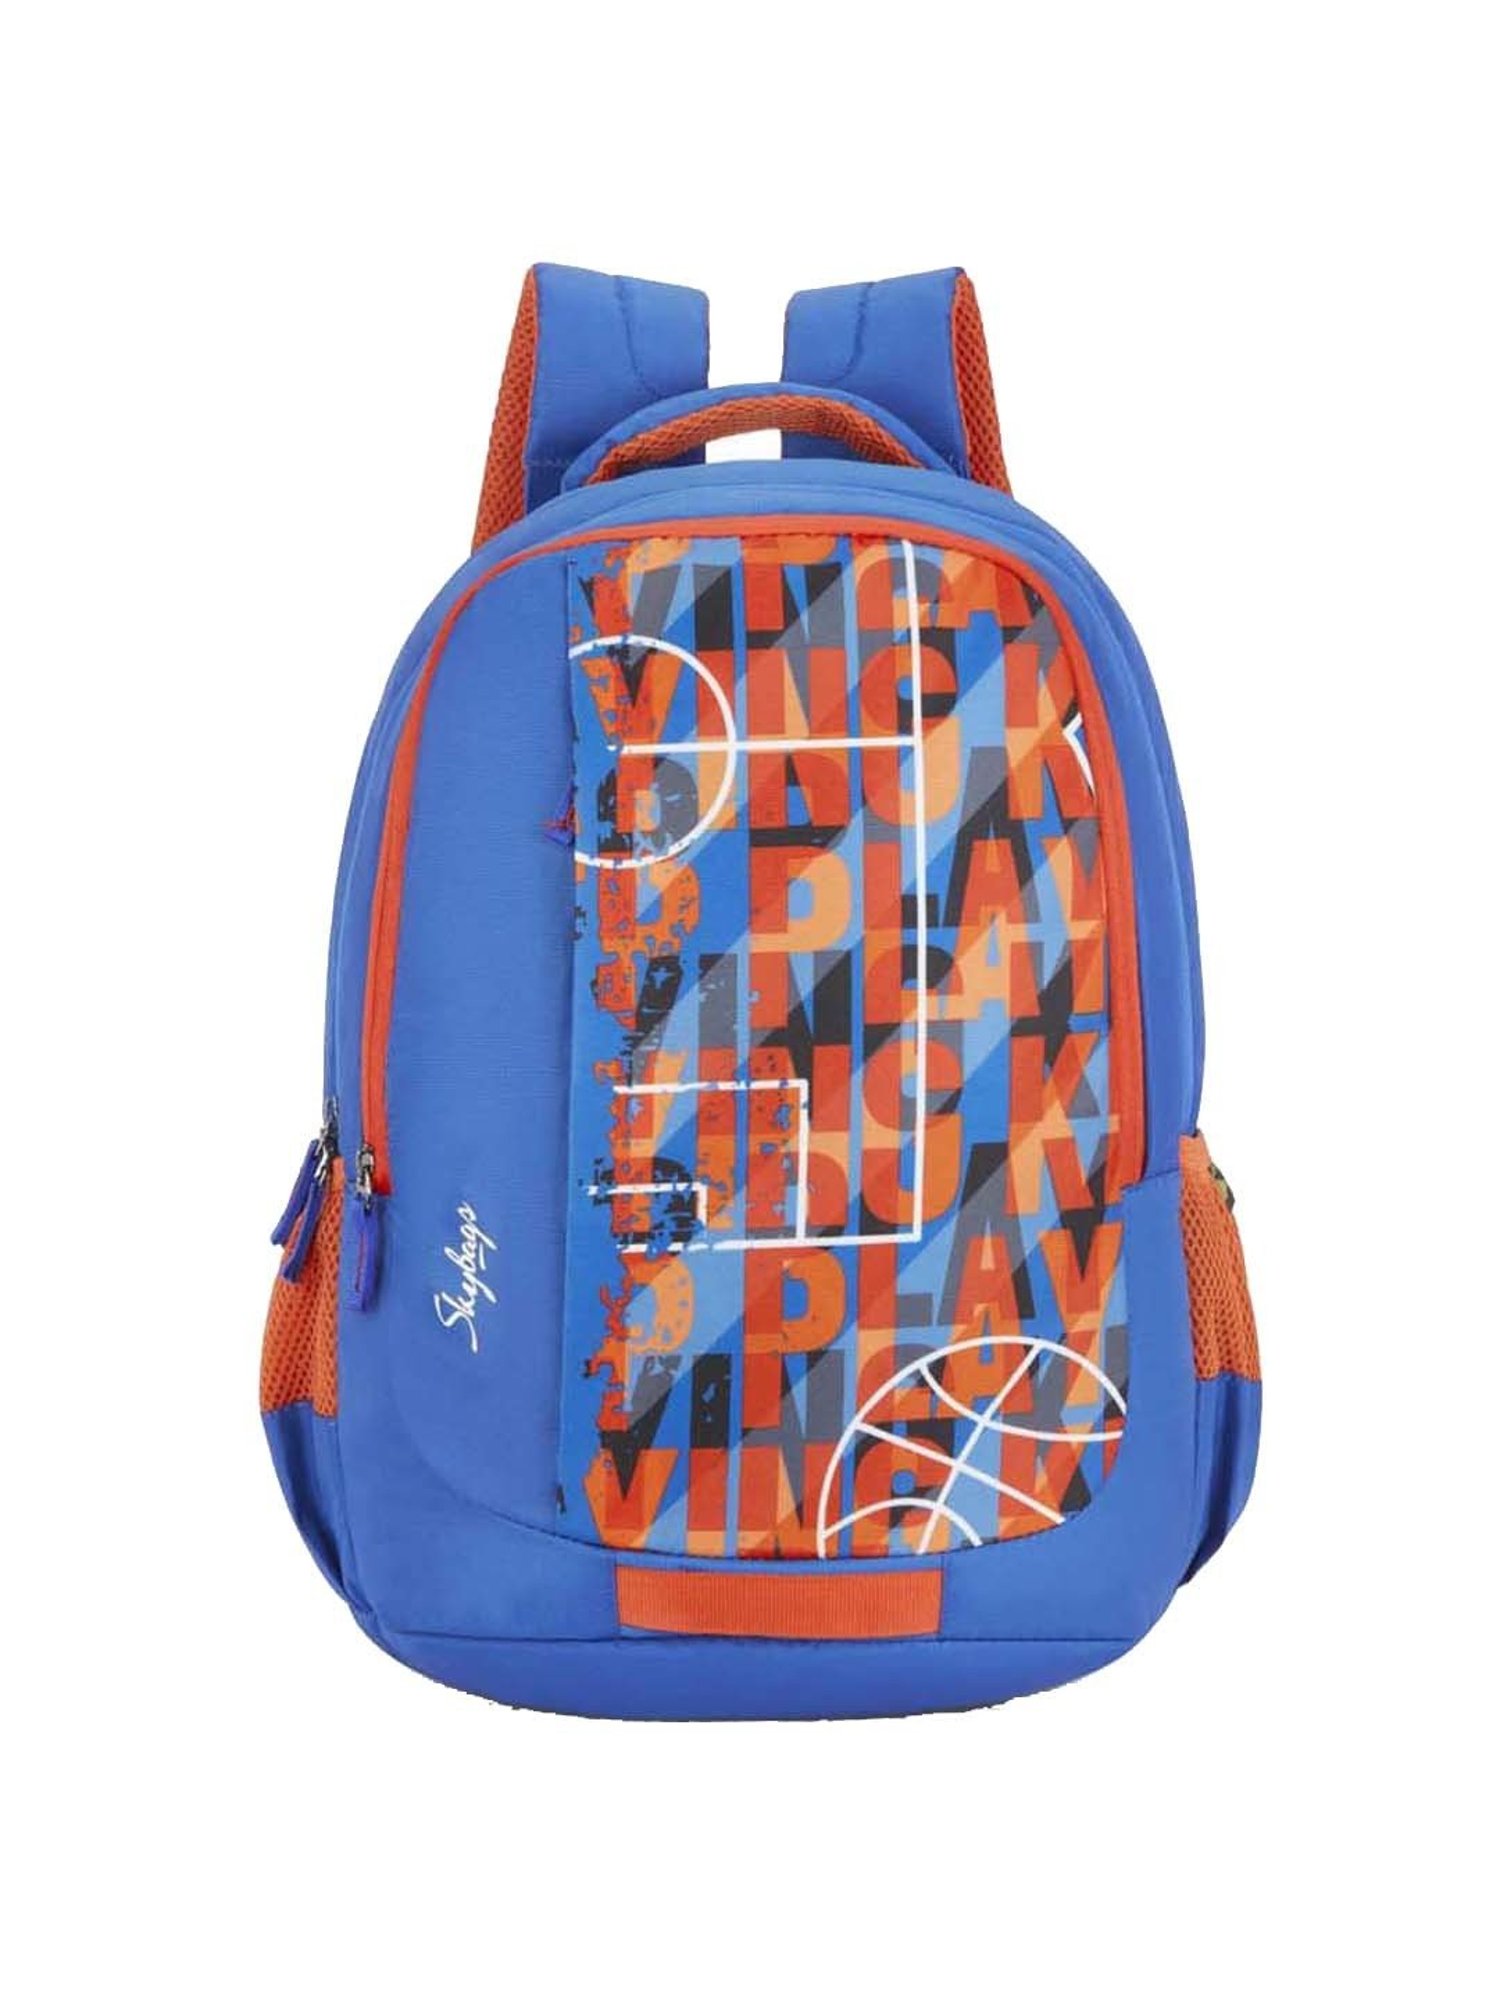 Buy Skybags ASTRO AIRPLANE THEME BLUE SCHOOL BACKPACK 32L at Amazon.in